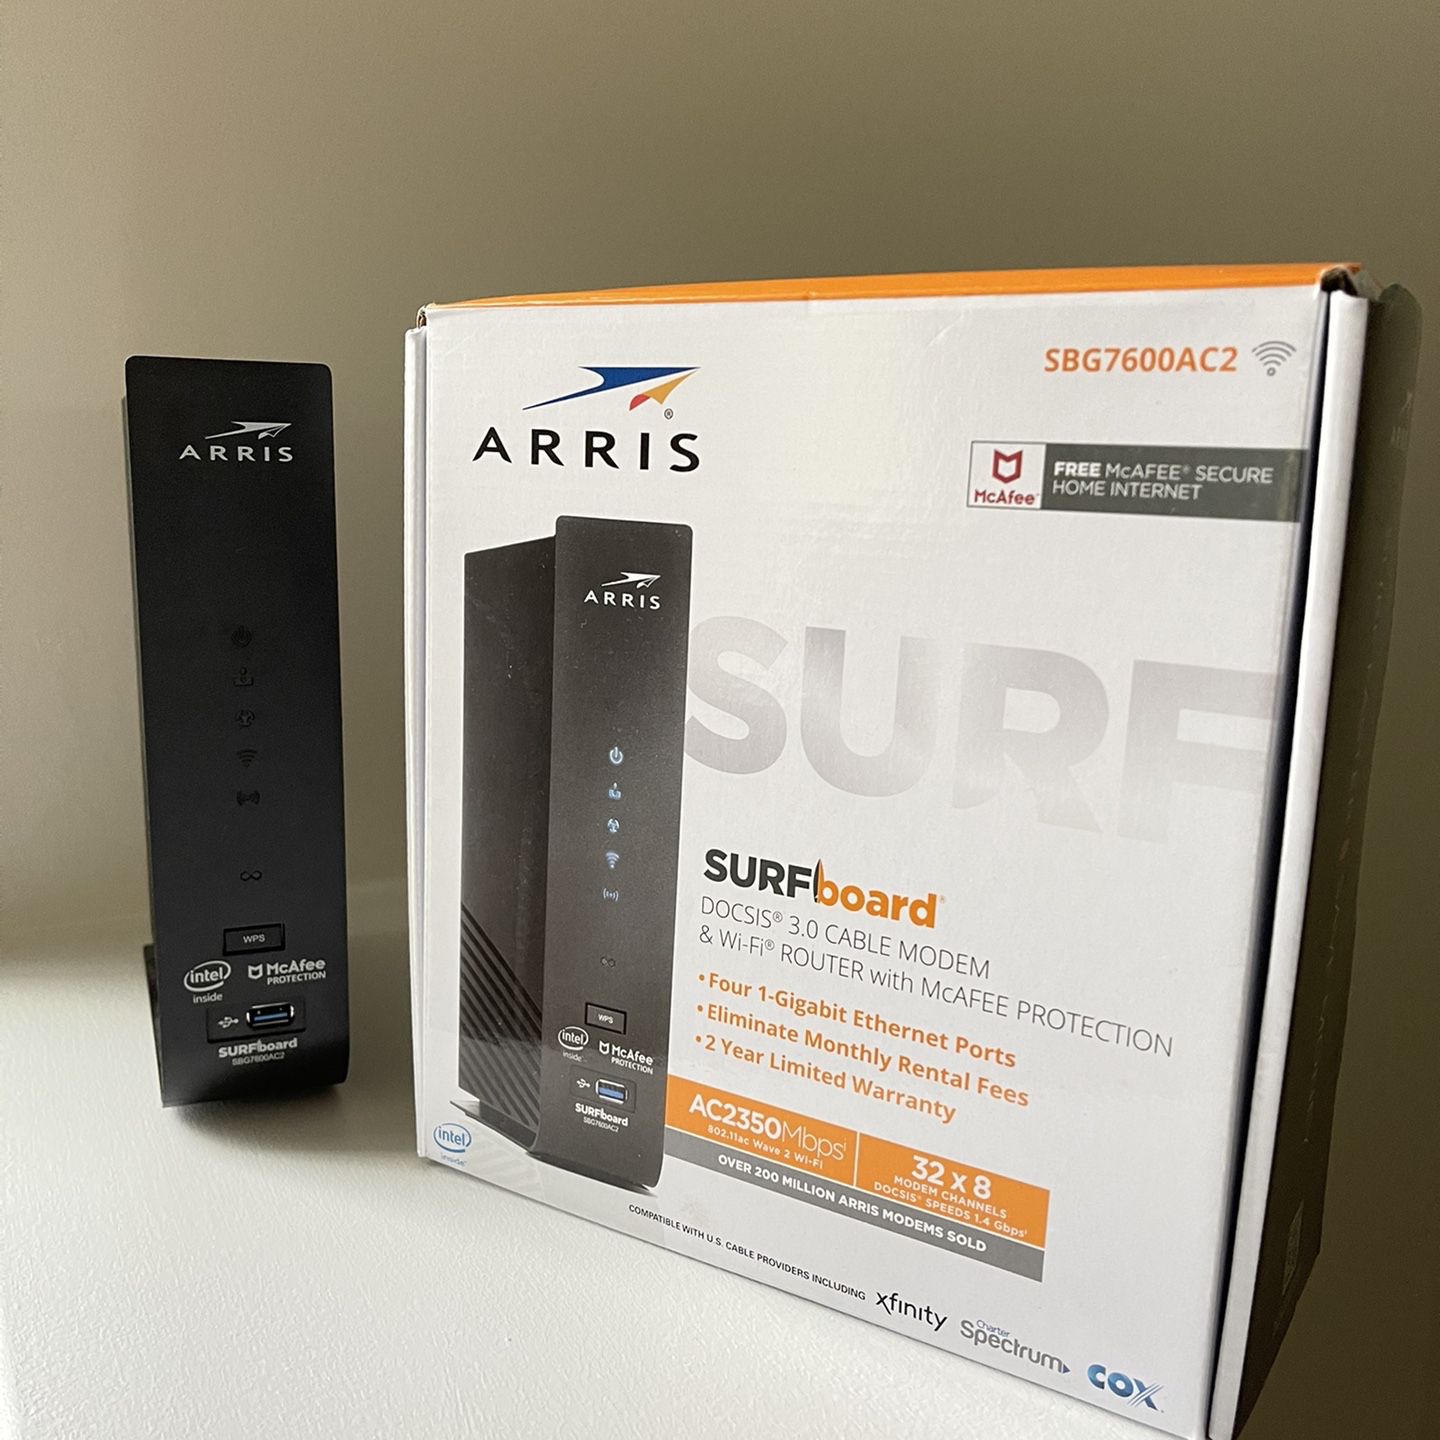 ARRIS Wi-Fi Router & Cable Modem - Approved for Cox, Spectrum, Xfinity & others